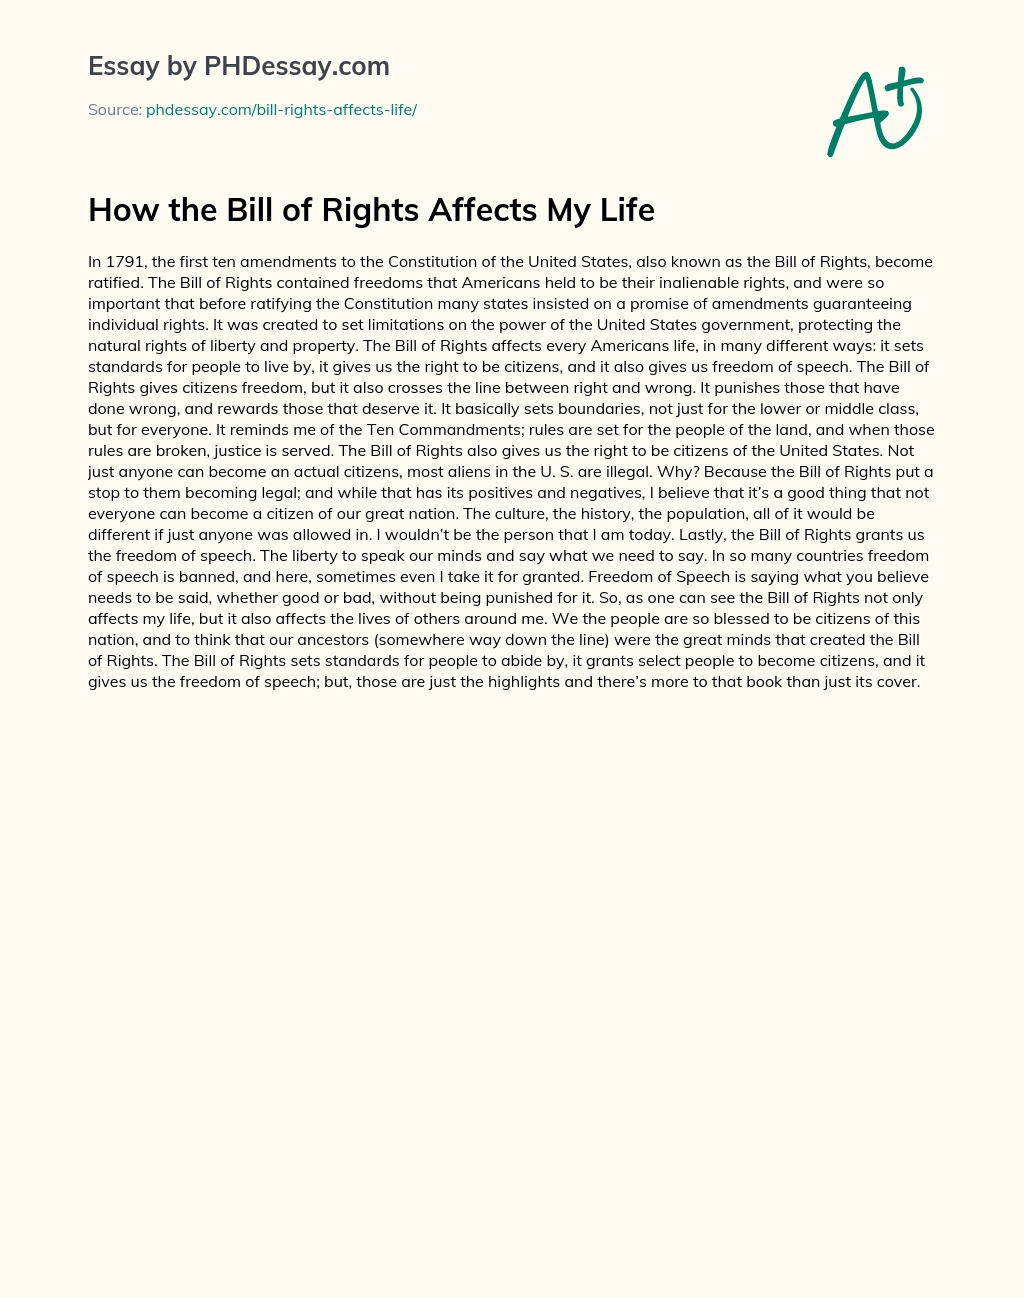 How the Bill of Rights Affects My Life essay